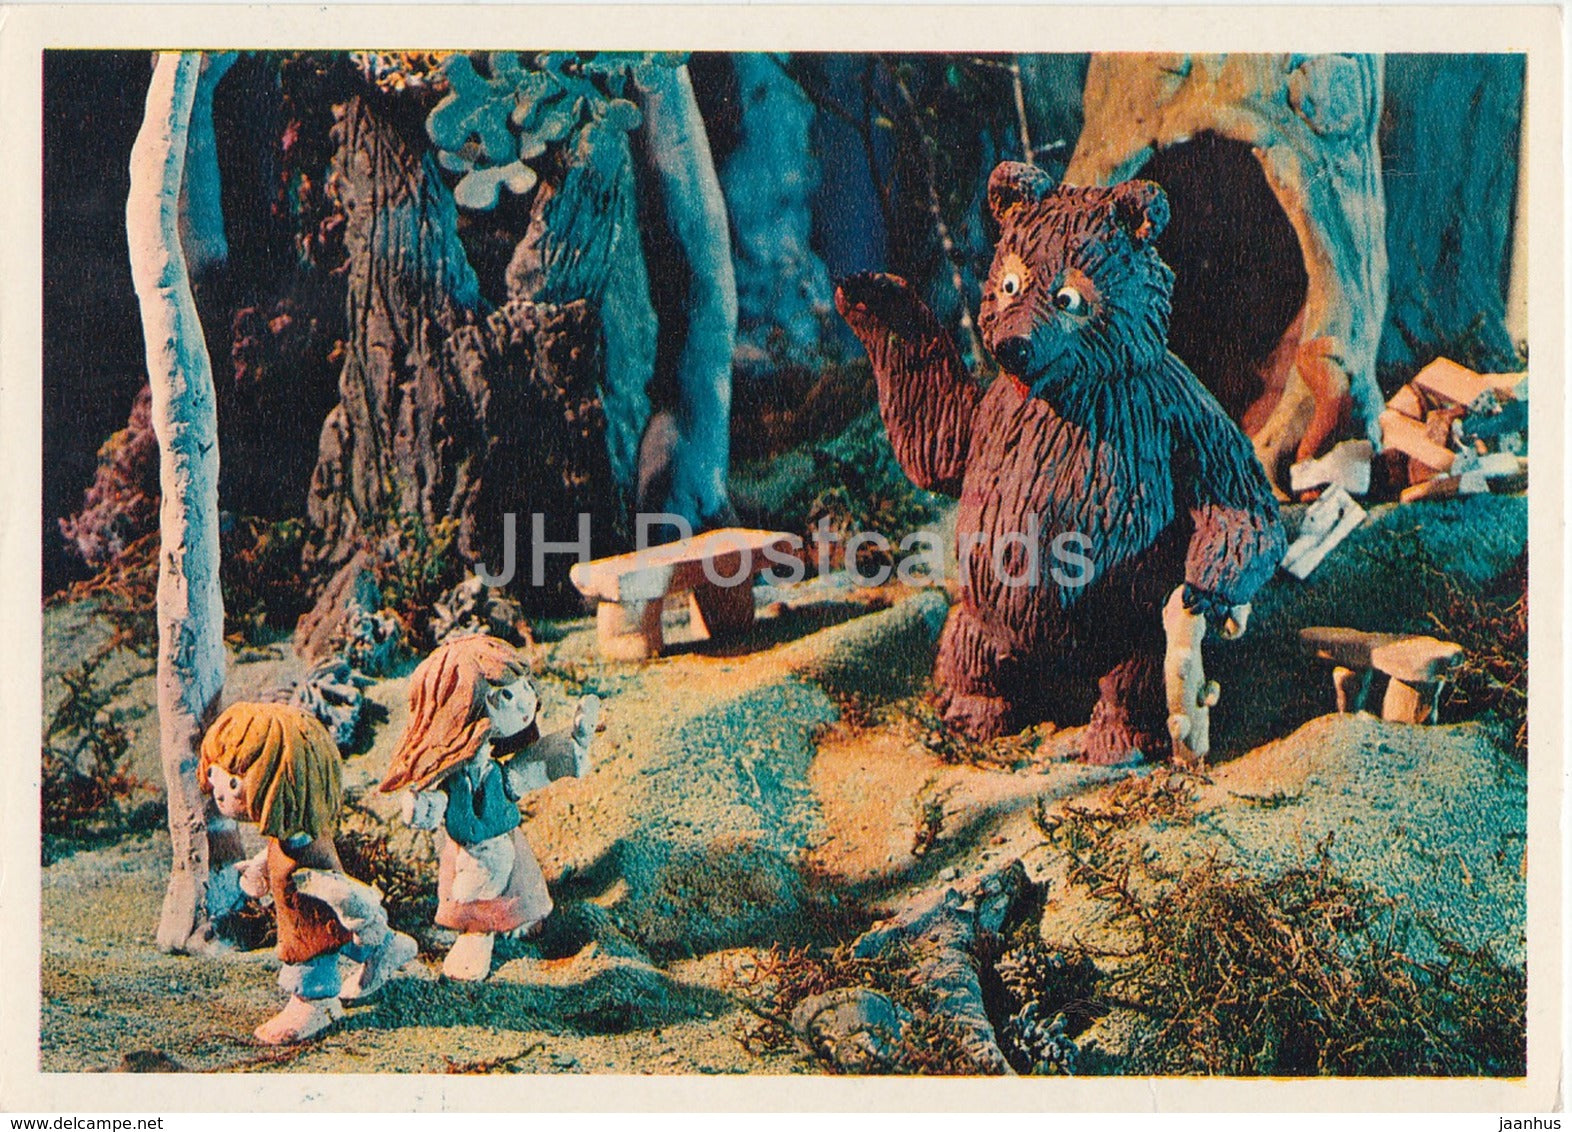 Hansel and Gretel by Brothers Grimm - bear - 1 - dolls - Fairy Tale - 1975 - Russia USSR - unused - JH Postcards